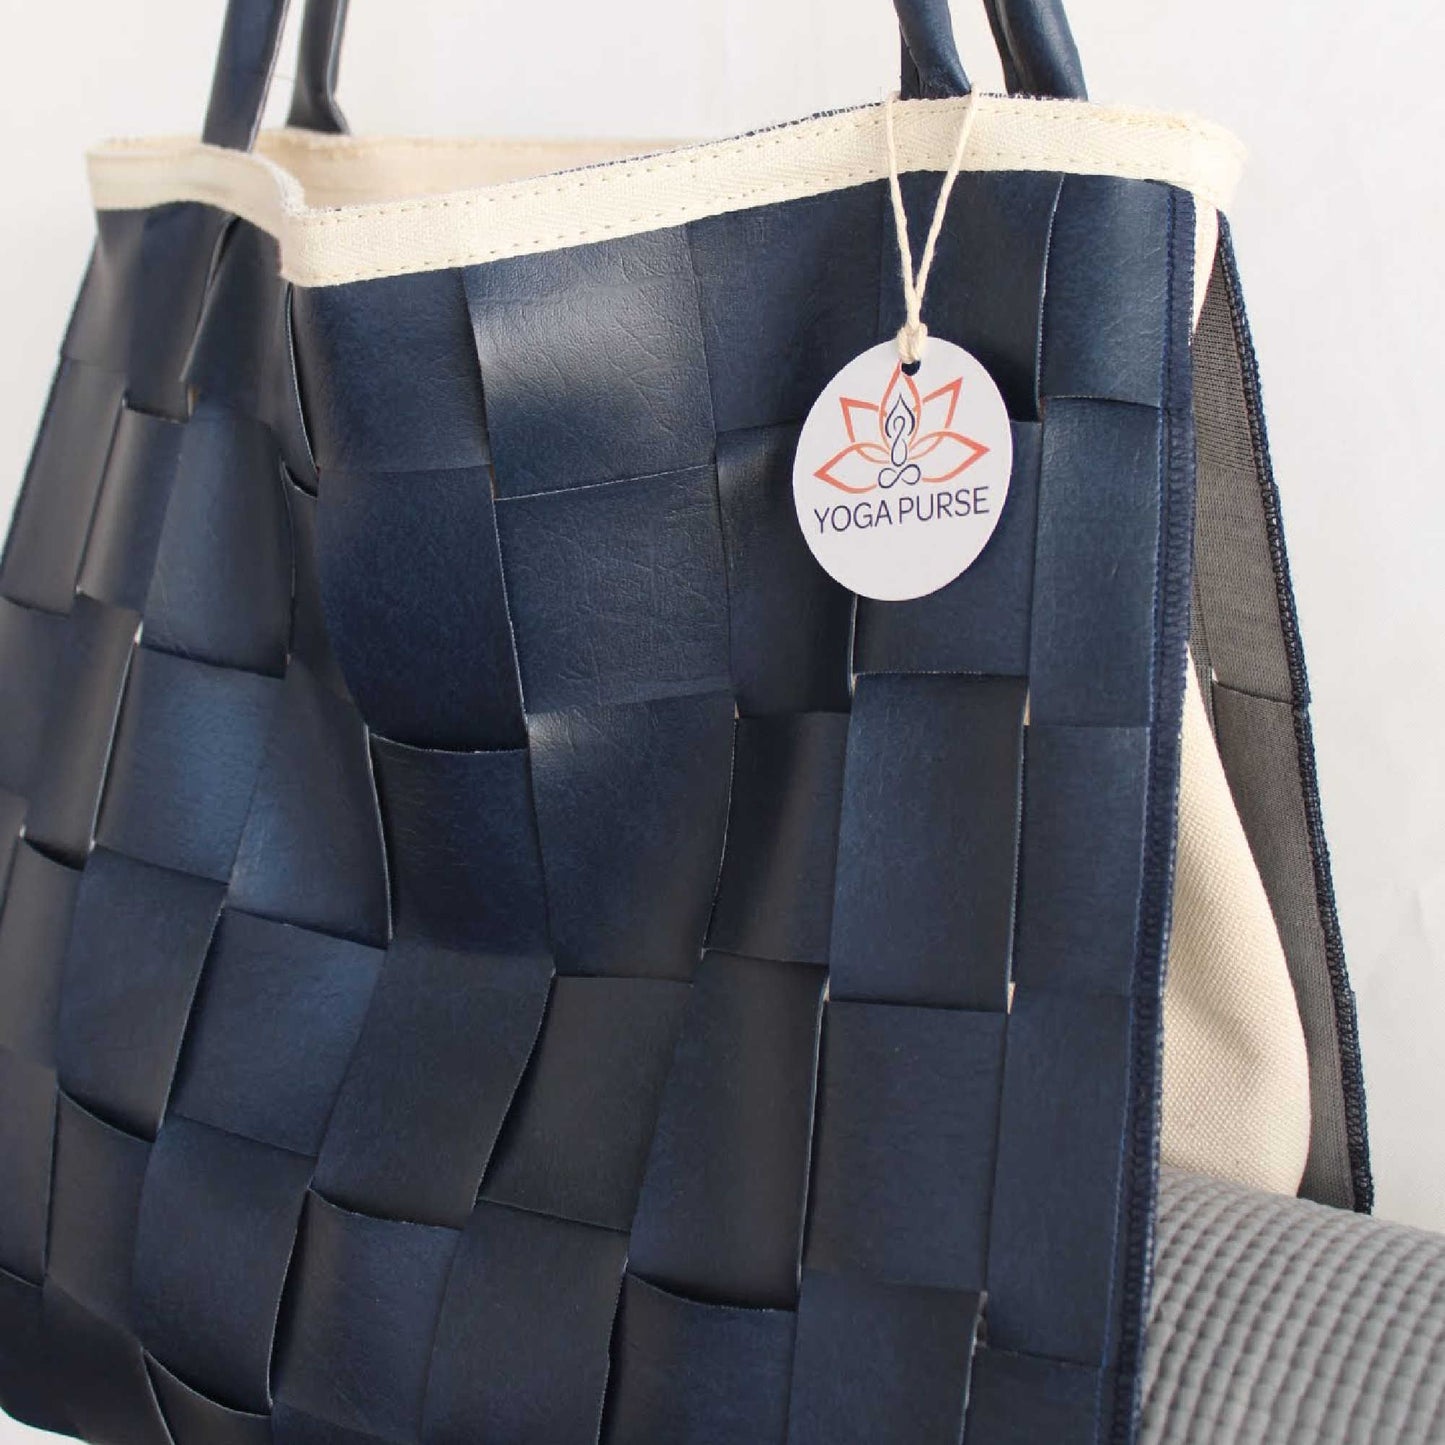 vegan leather yoga Mat carrier bag with tote bag navy 